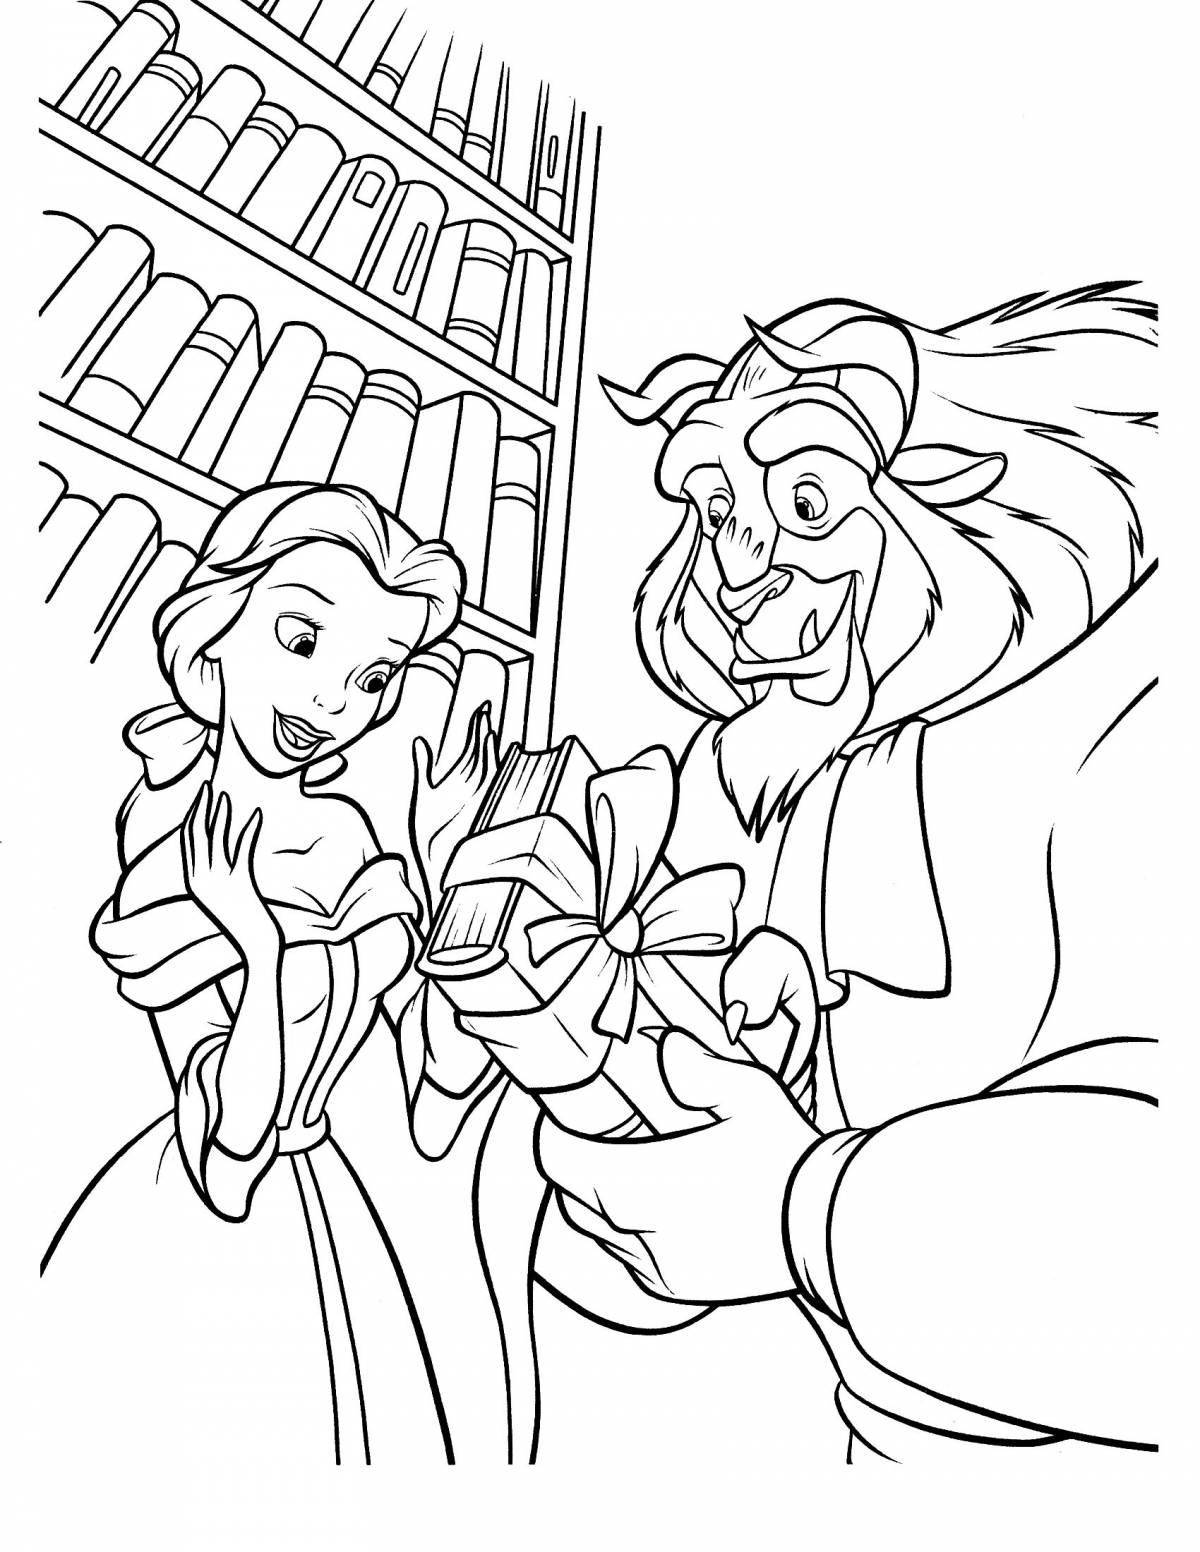 Belle and the monster colorful coloring book